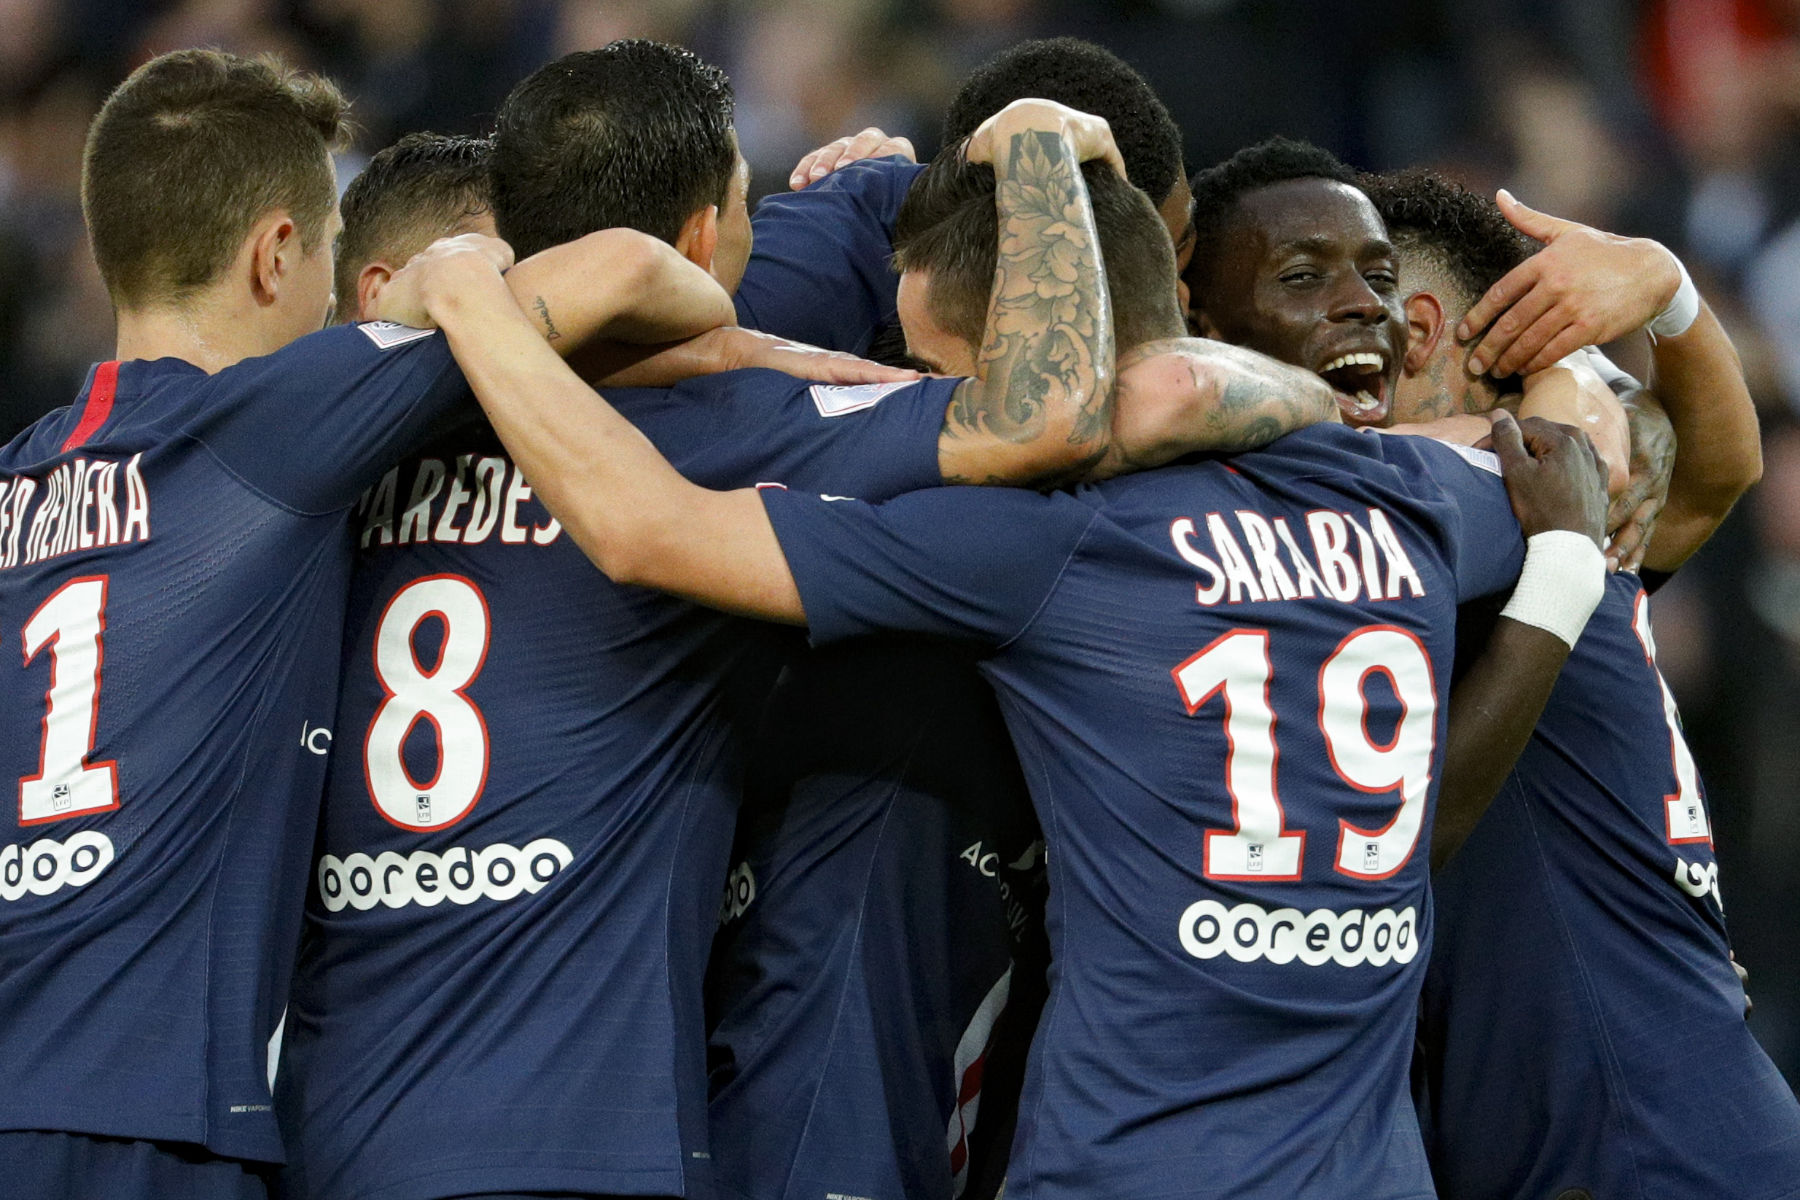 Video: Idrissa Gueye Bangs In a Goal for PSG Against Angers - PSG Talk